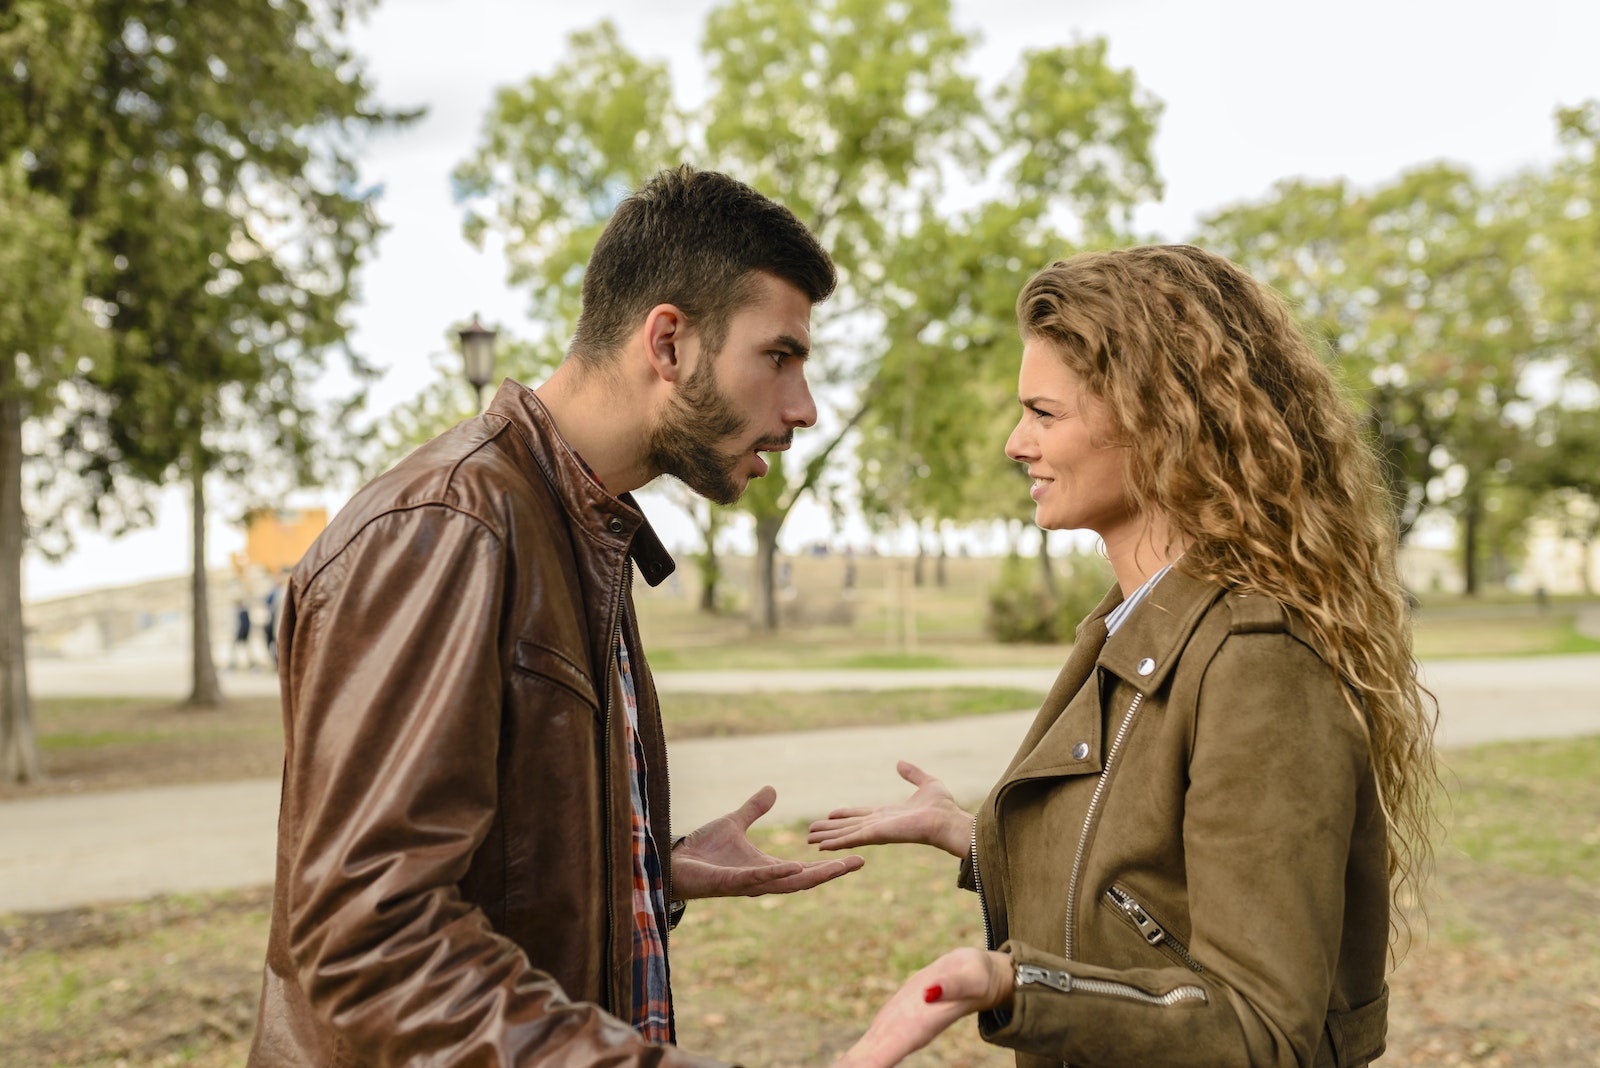 Man And Woman Wearing Brown Leather Jackets